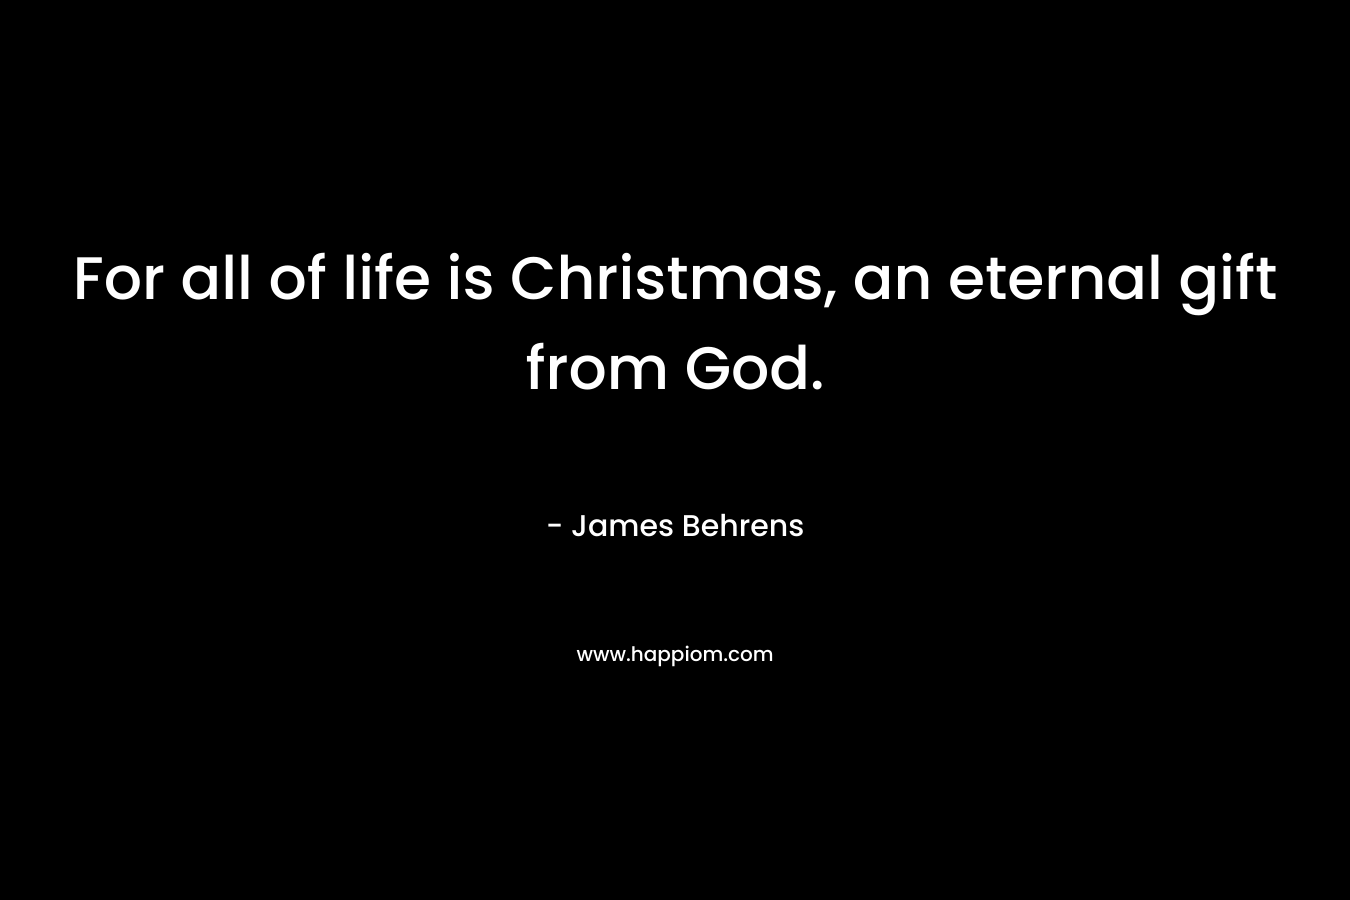 For all of life is Christmas, an eternal gift from God. – James Behrens